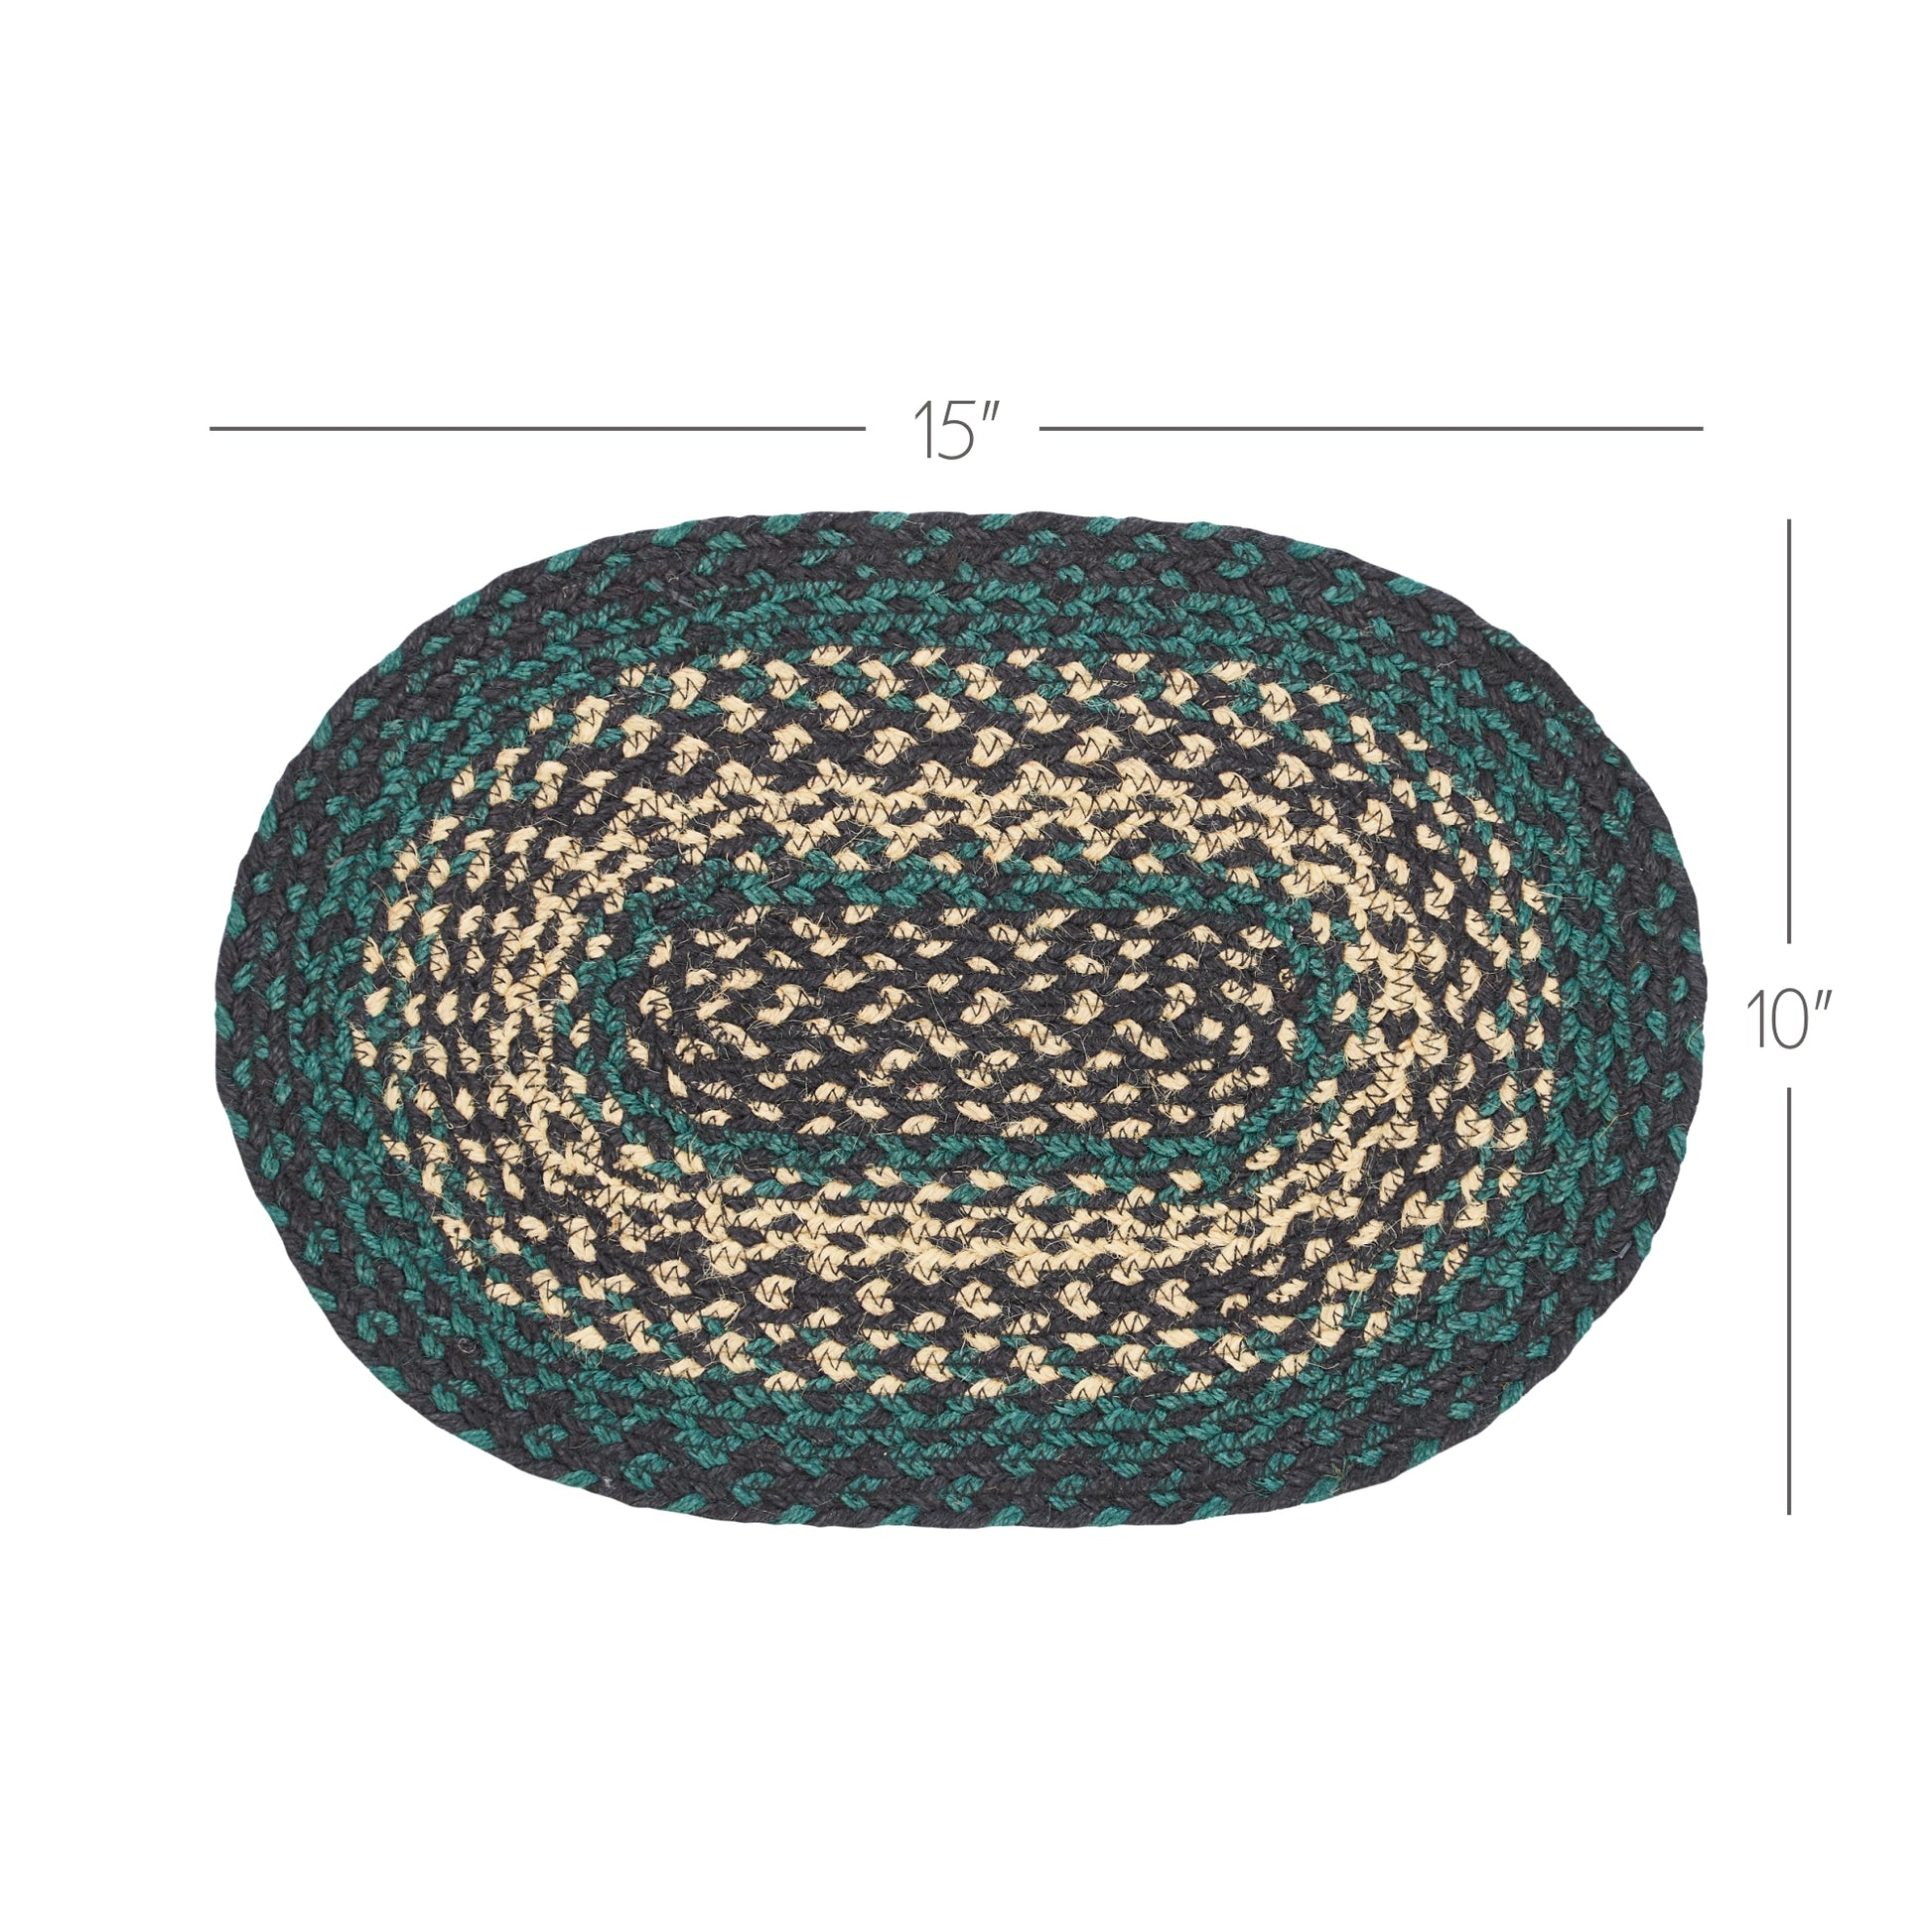 81401-Pine-Grove-Jute-Oval-Placemat-10x15-image-1